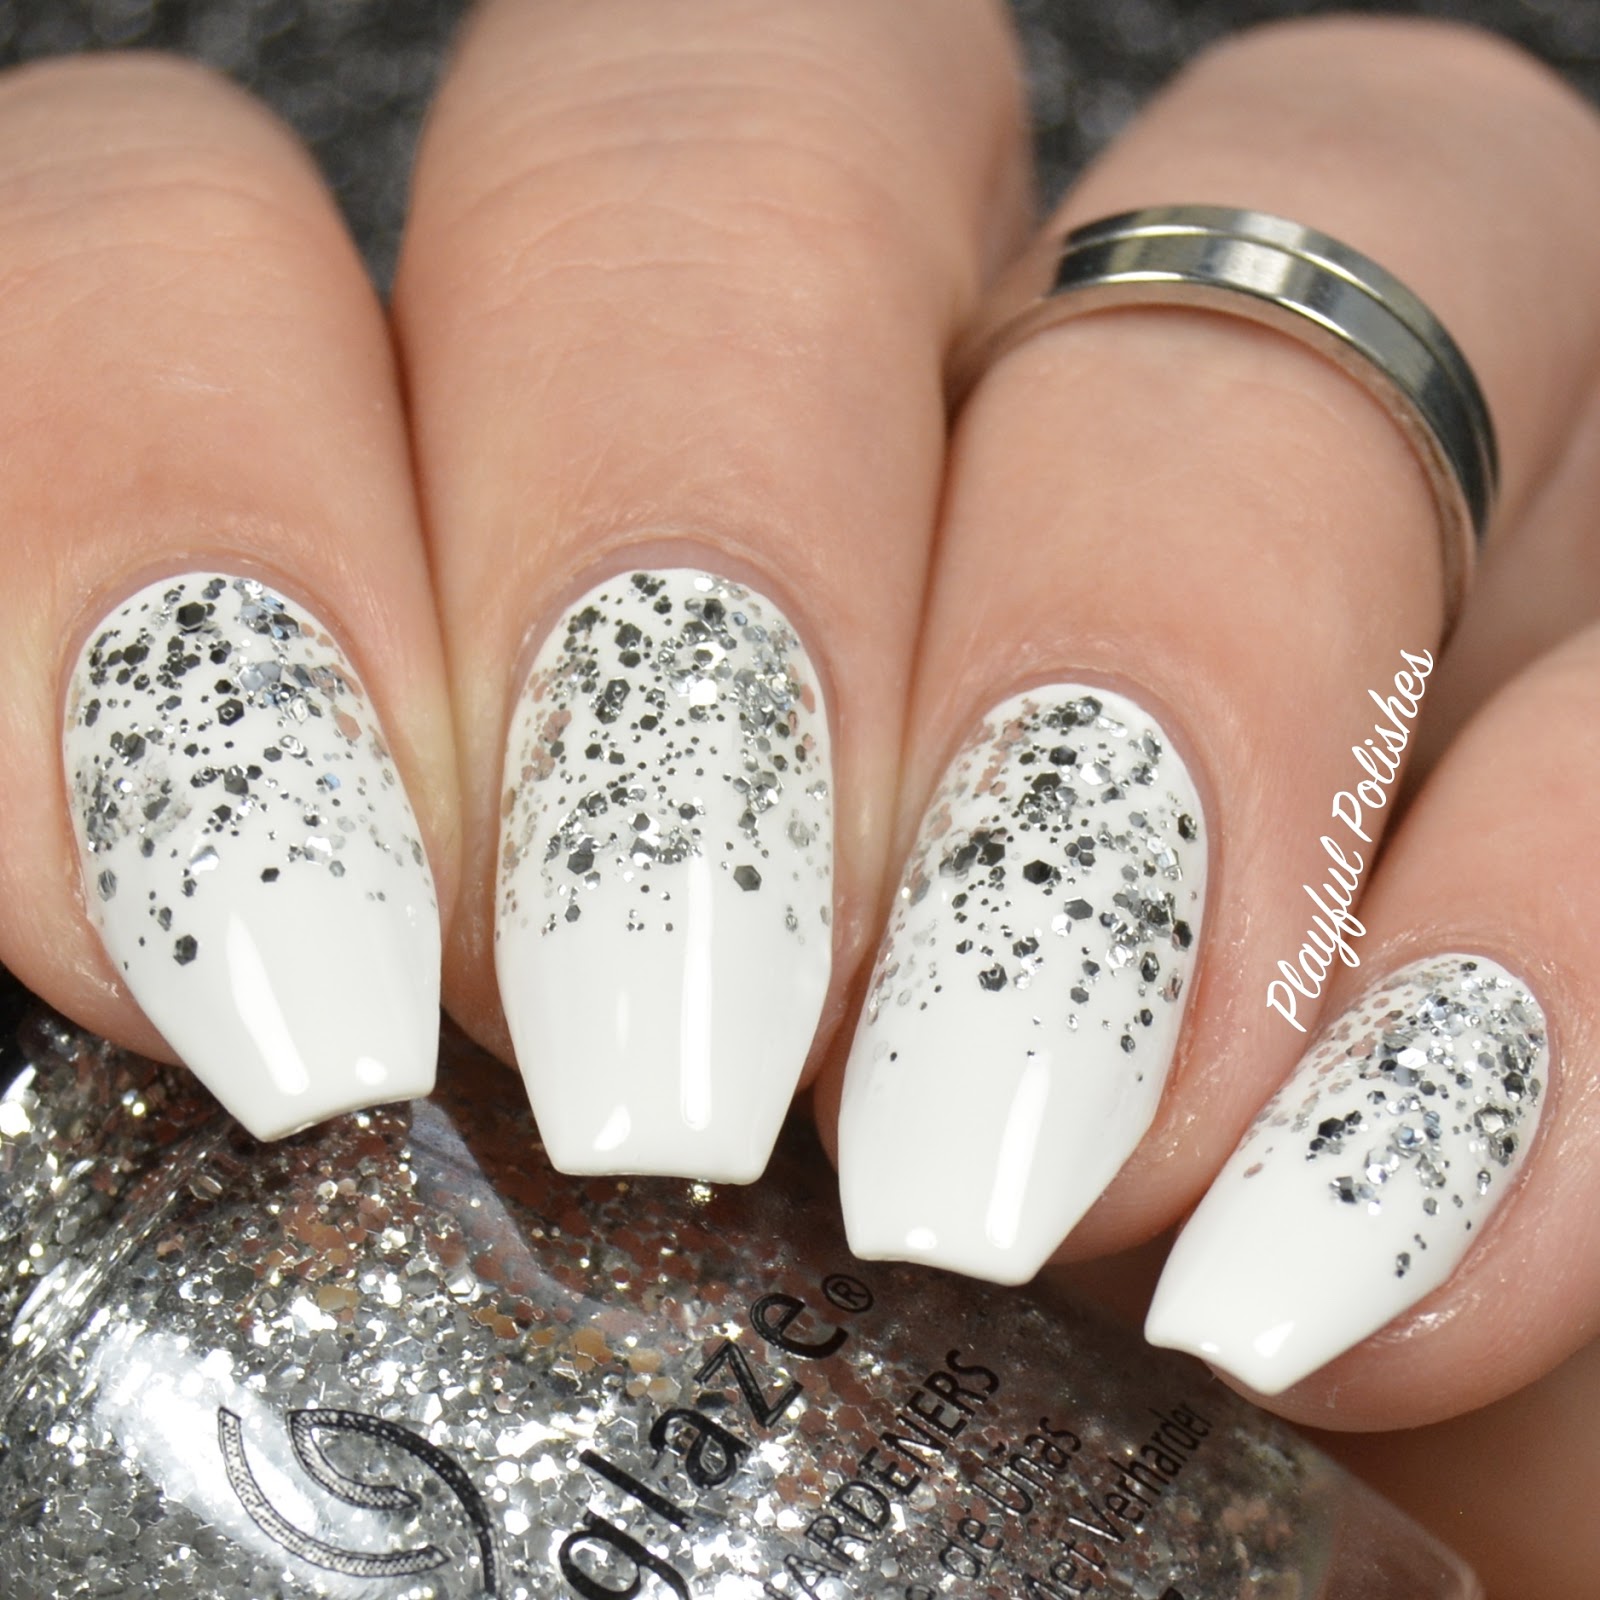 Playful Polishes: 3 SIMPLE & ELEGANT NEW YEARS NAIL DESIGNS!!